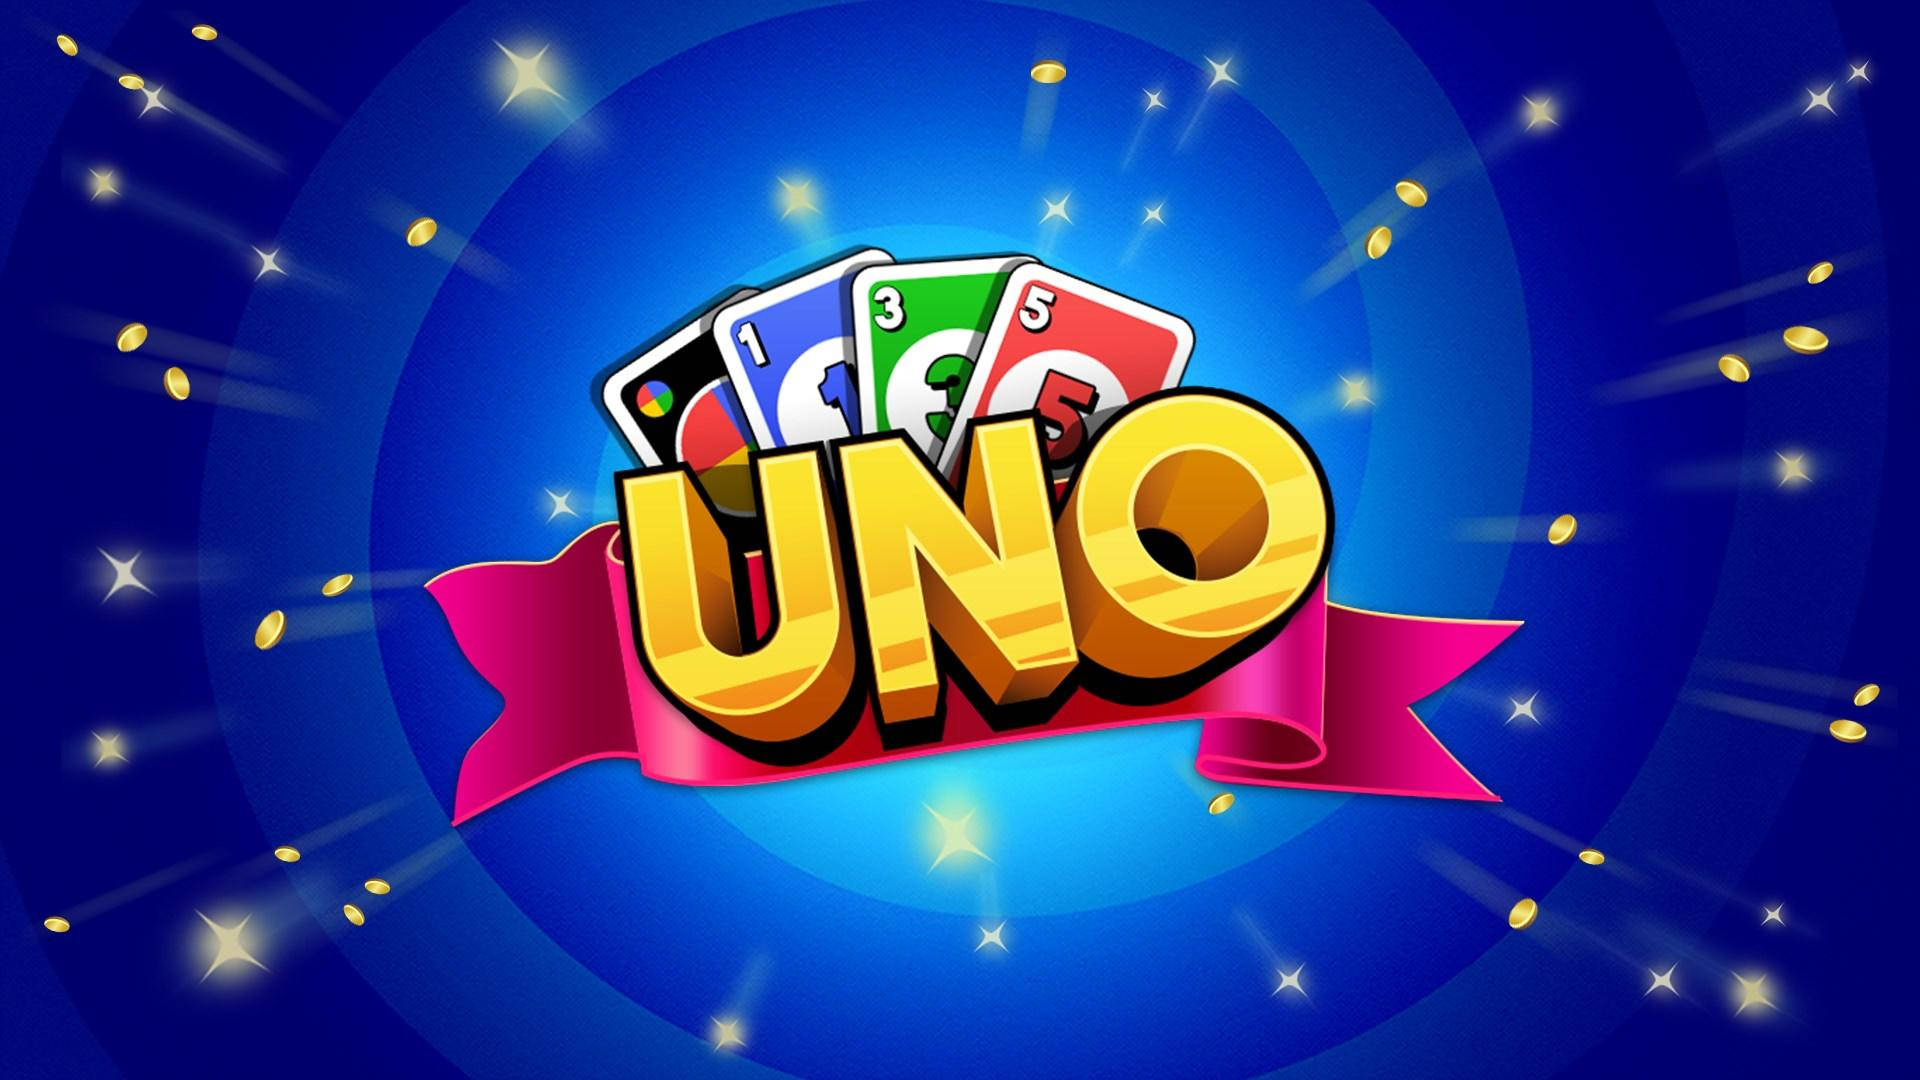 Uno Card Game Blue Poster Wallpaper